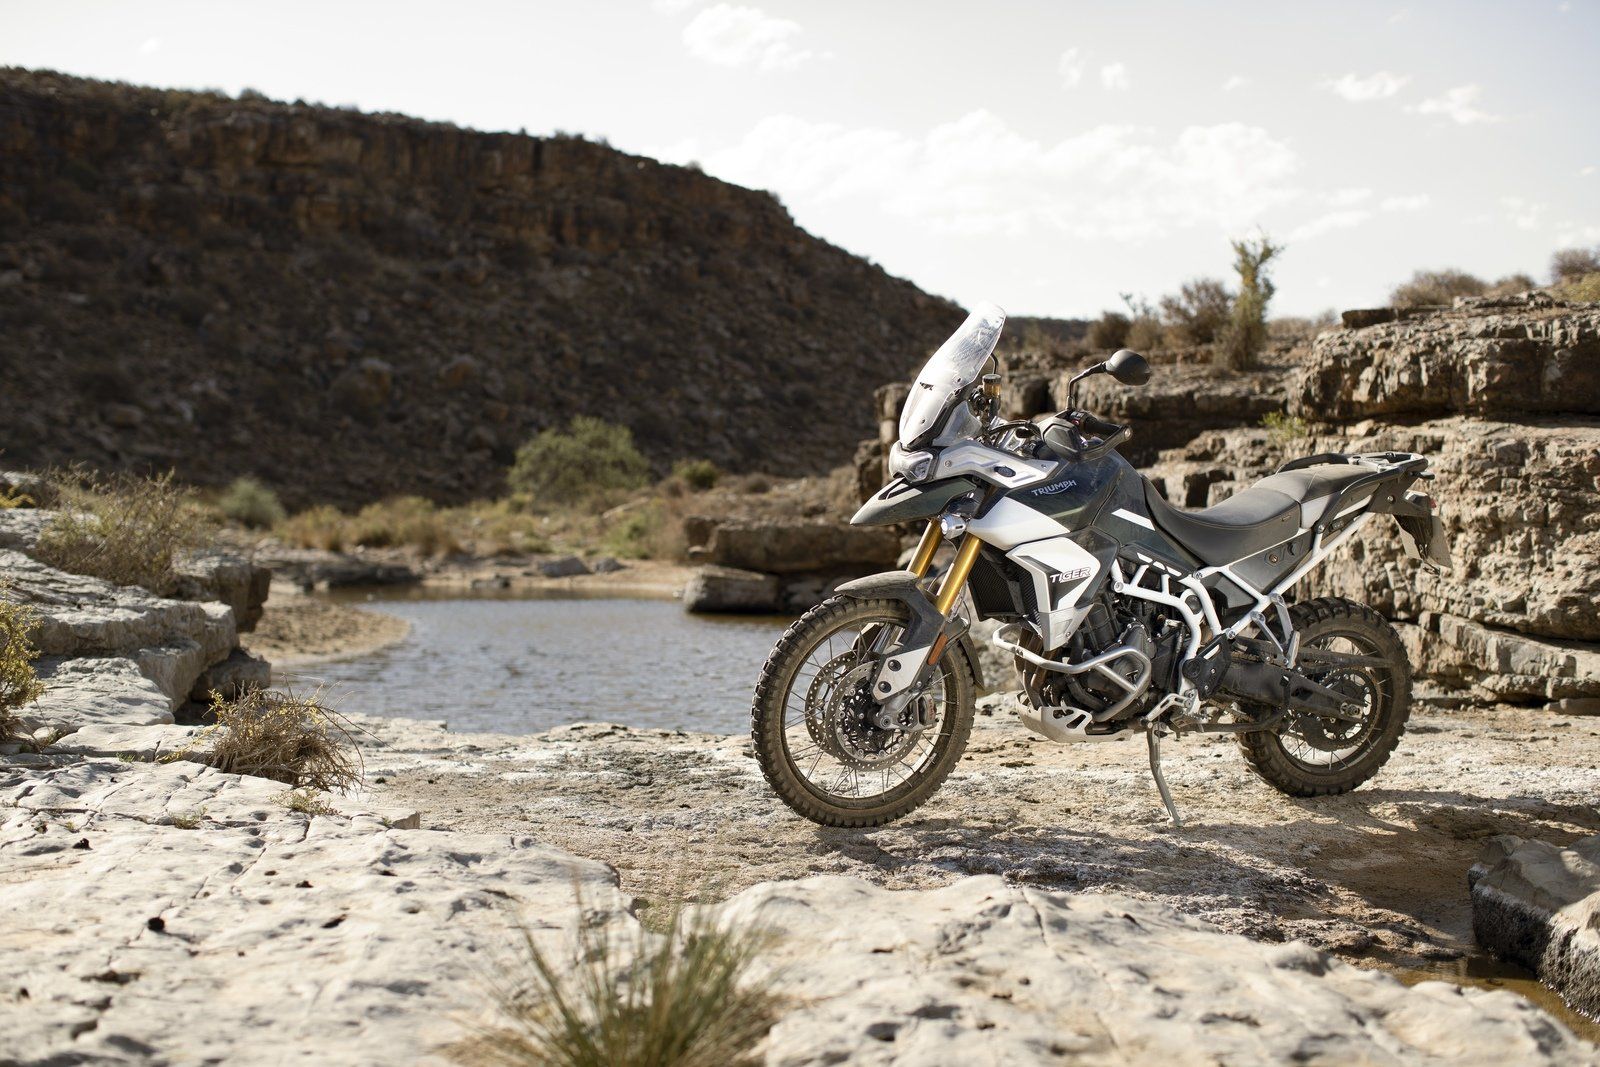 Triumph Tiger 900 RALLY / RALLY PRO Picture, Photo, Wallpaper And Video